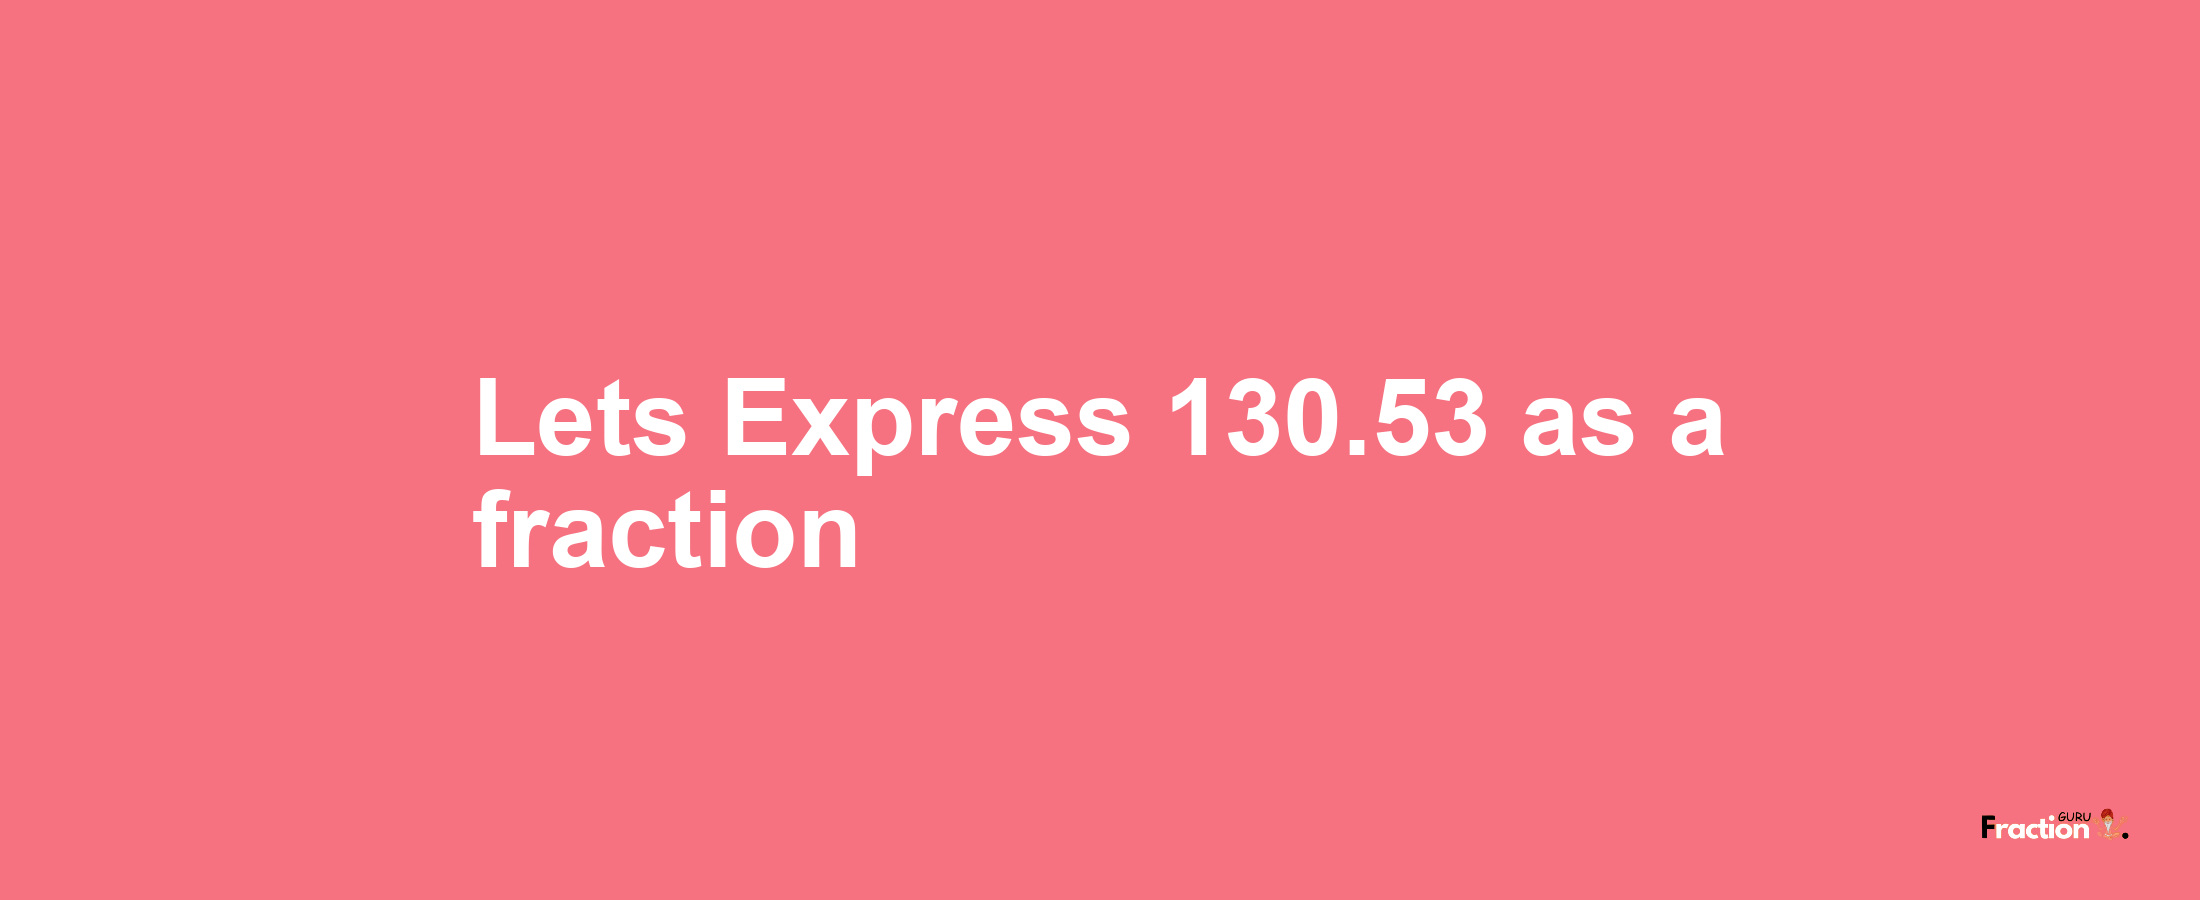 Lets Express 130.53 as afraction